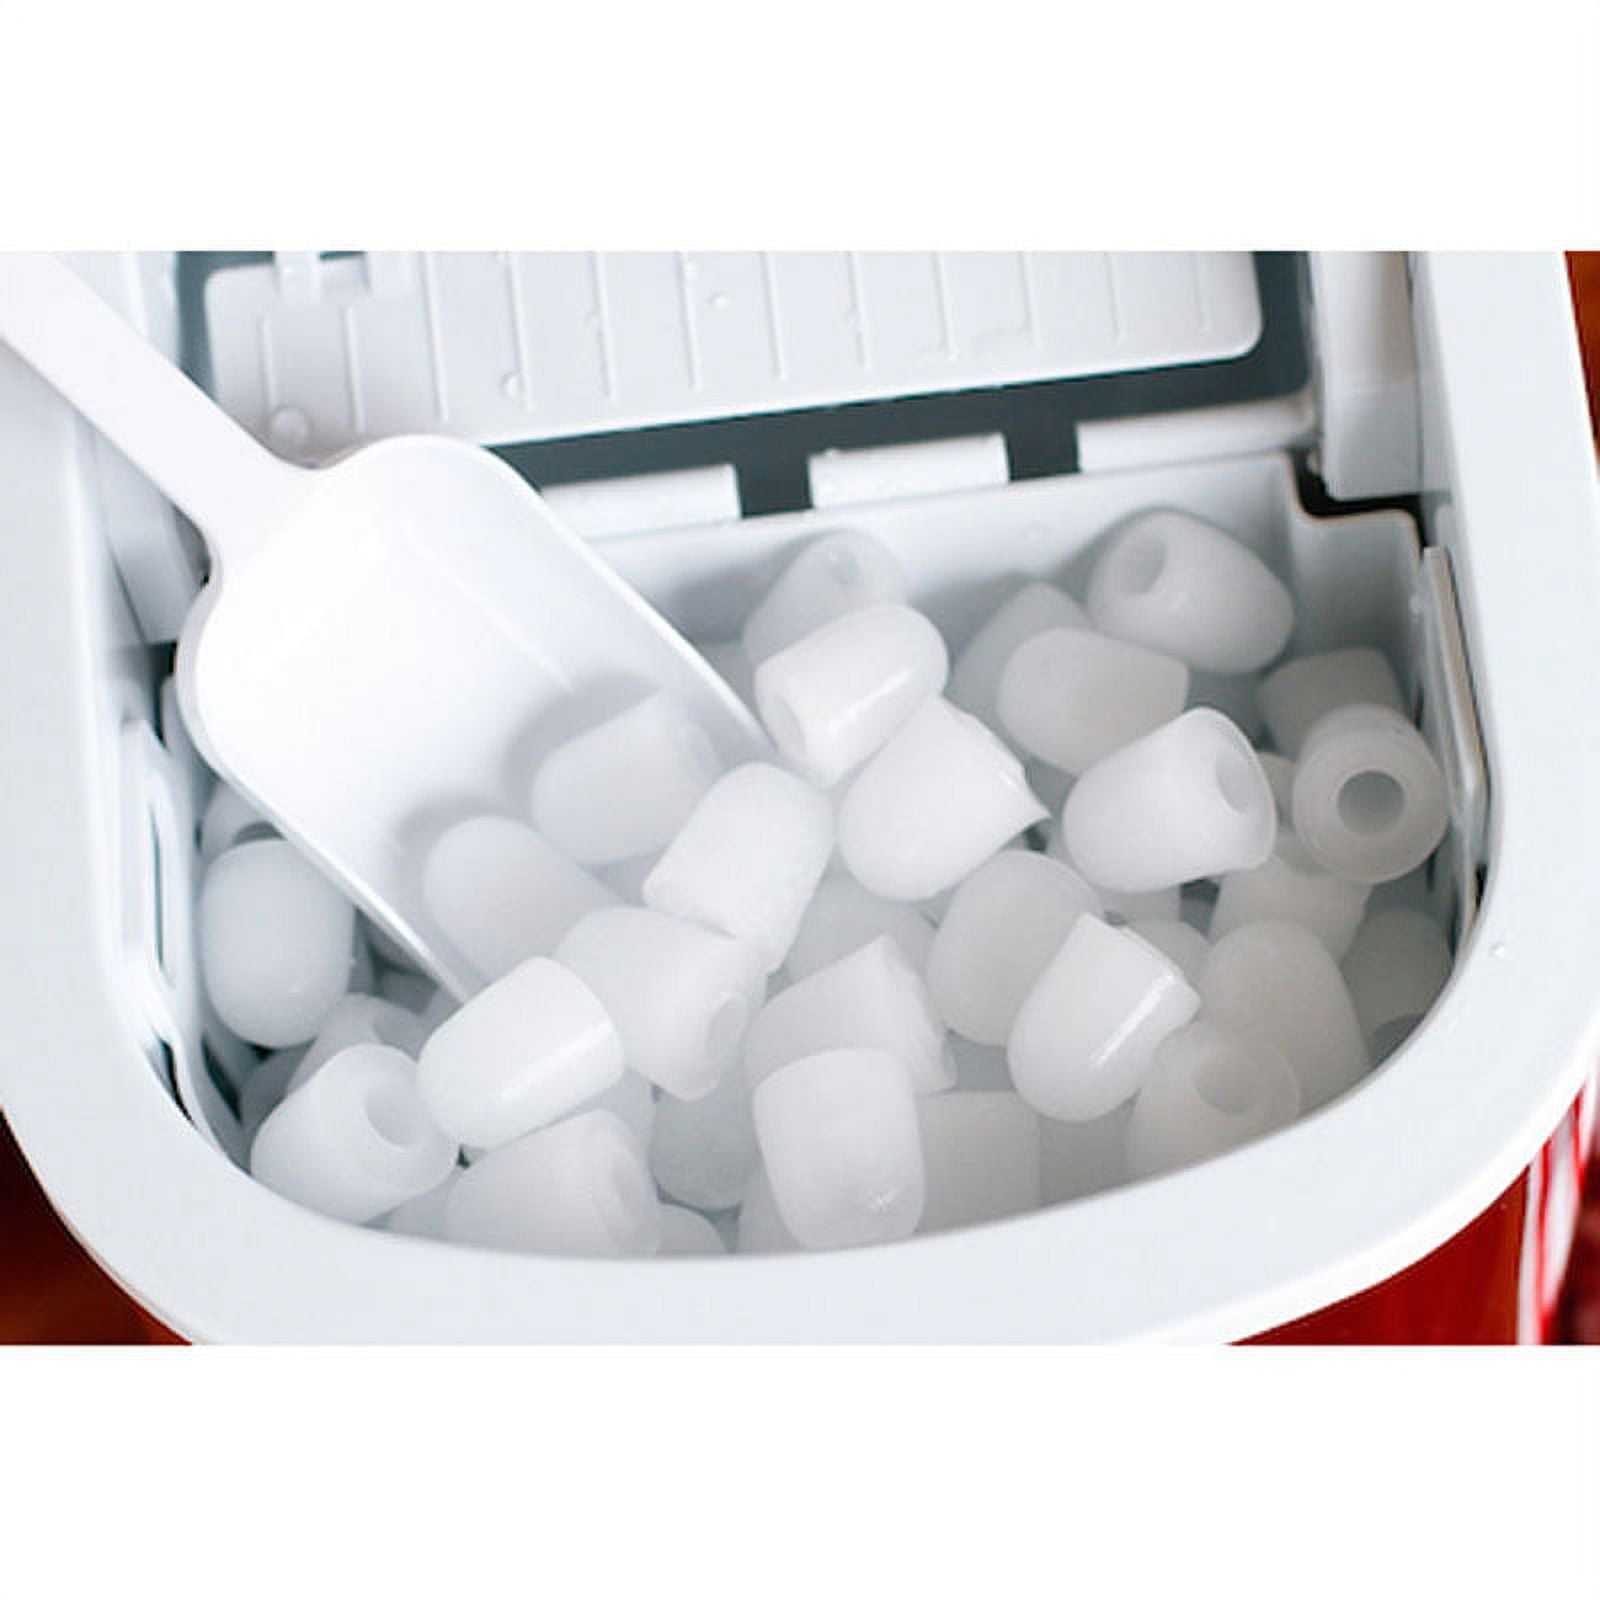 NEW Igloo Red ICE102 Portable Countertop Electronic Ice Maker +Scooper, Tray